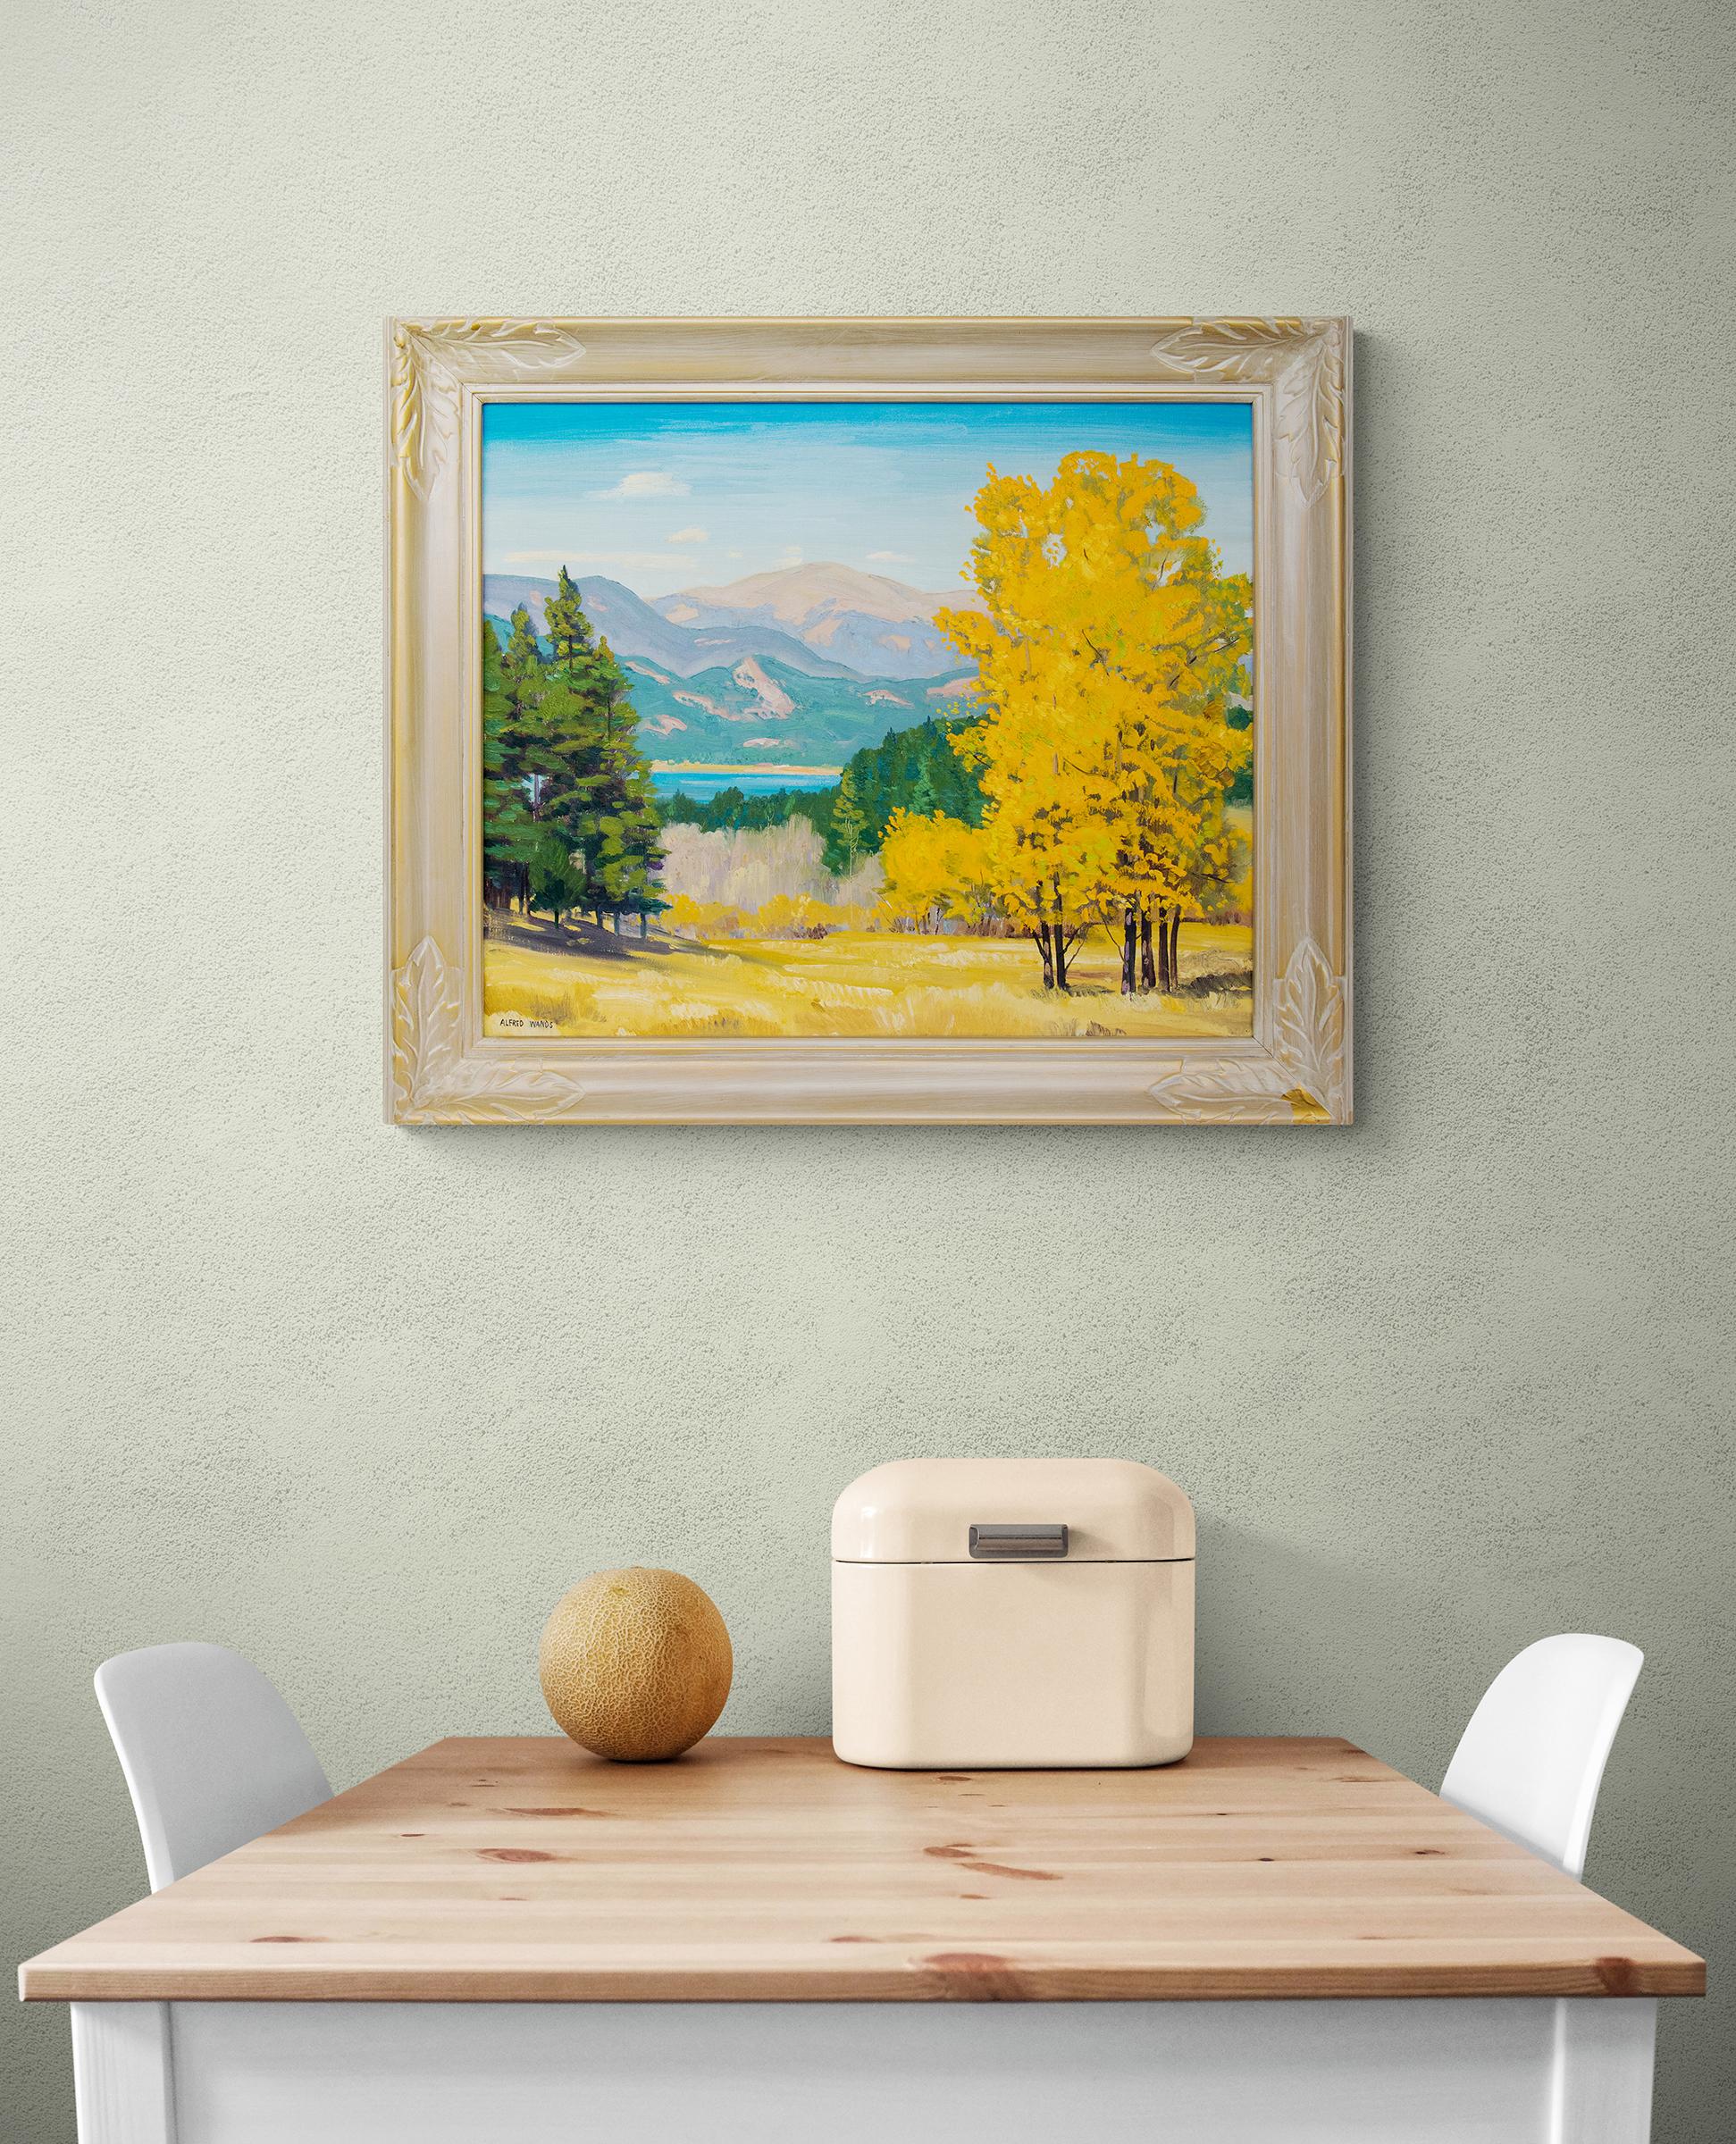 Vintage Colorado landscape painting in Autumn with green pine trees and aspen trees with golden leaves, lake and mountains with blue sky. Oil on canvas, signed lower left by the artist, Alfred Wands (1904-1998). Presented in a vintage frame, outer